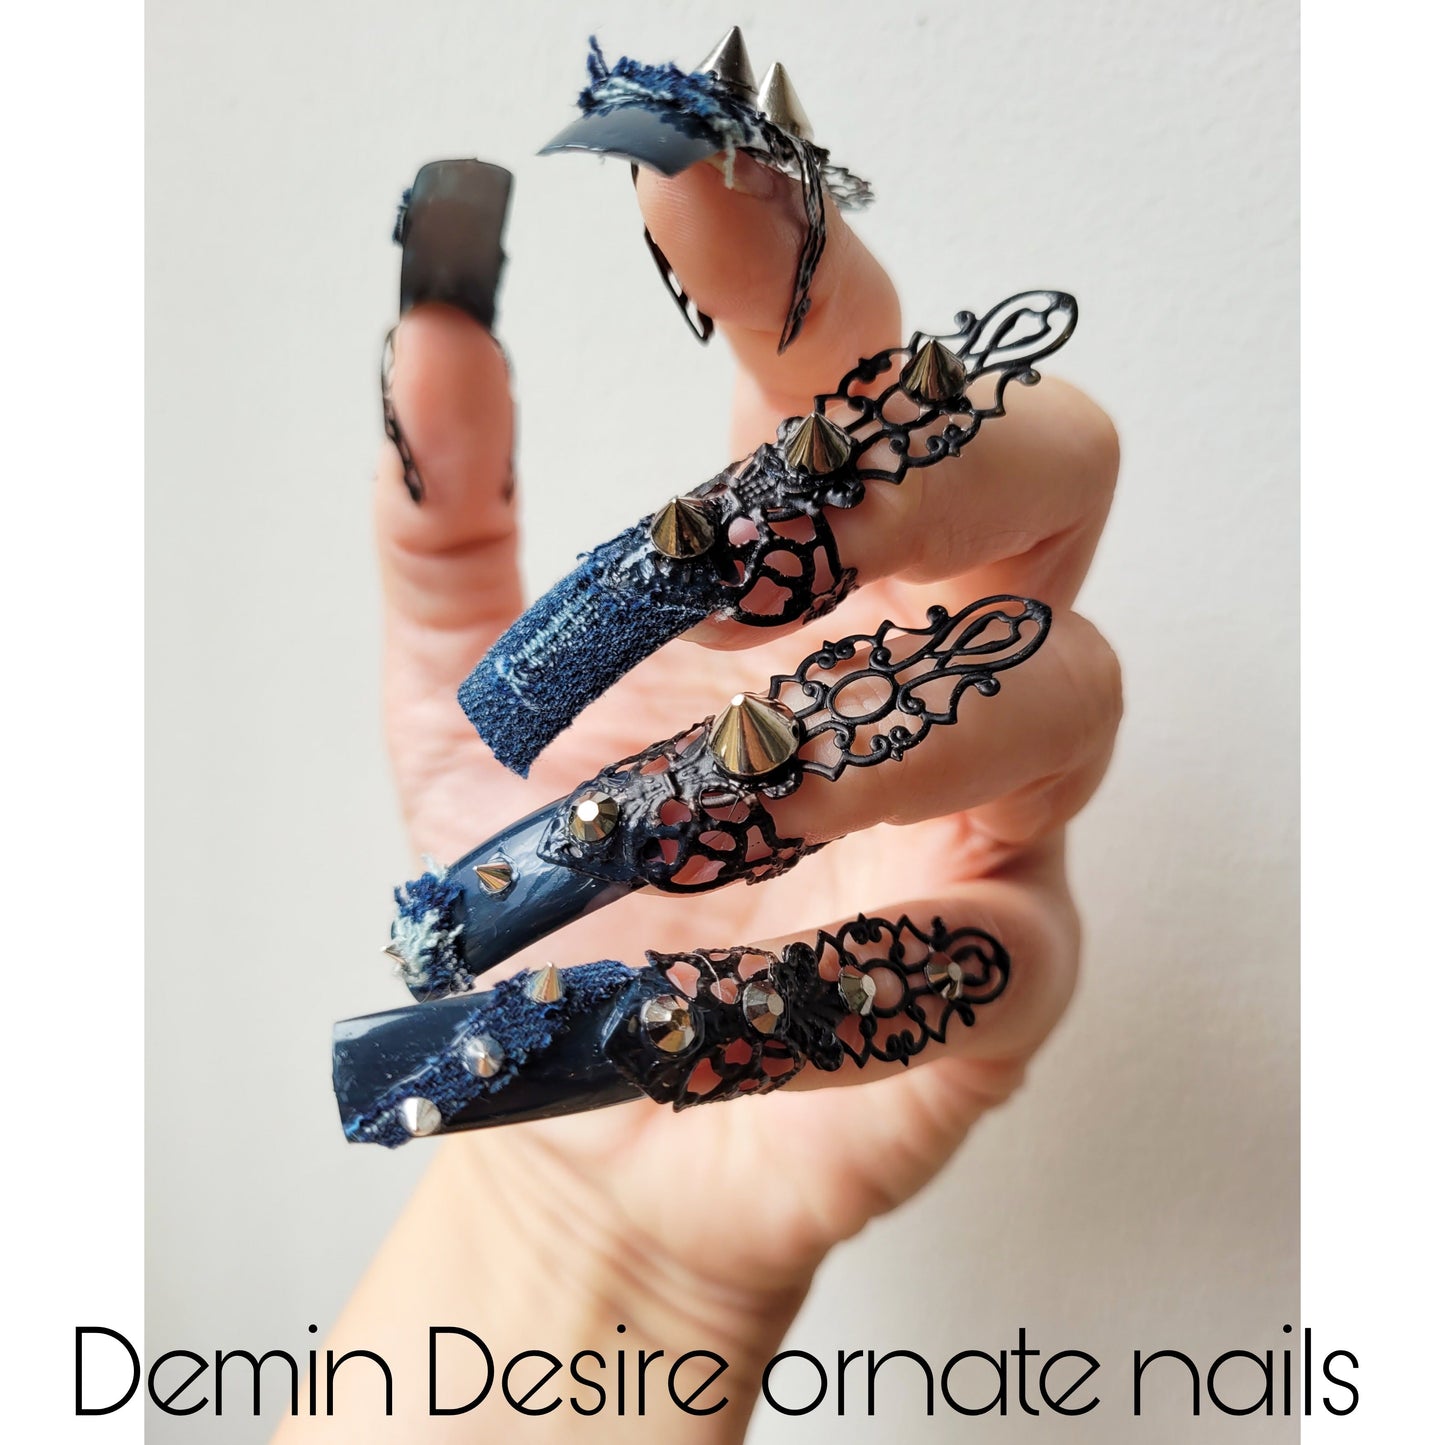 Made-to-order: the Denim Desire ornate nails